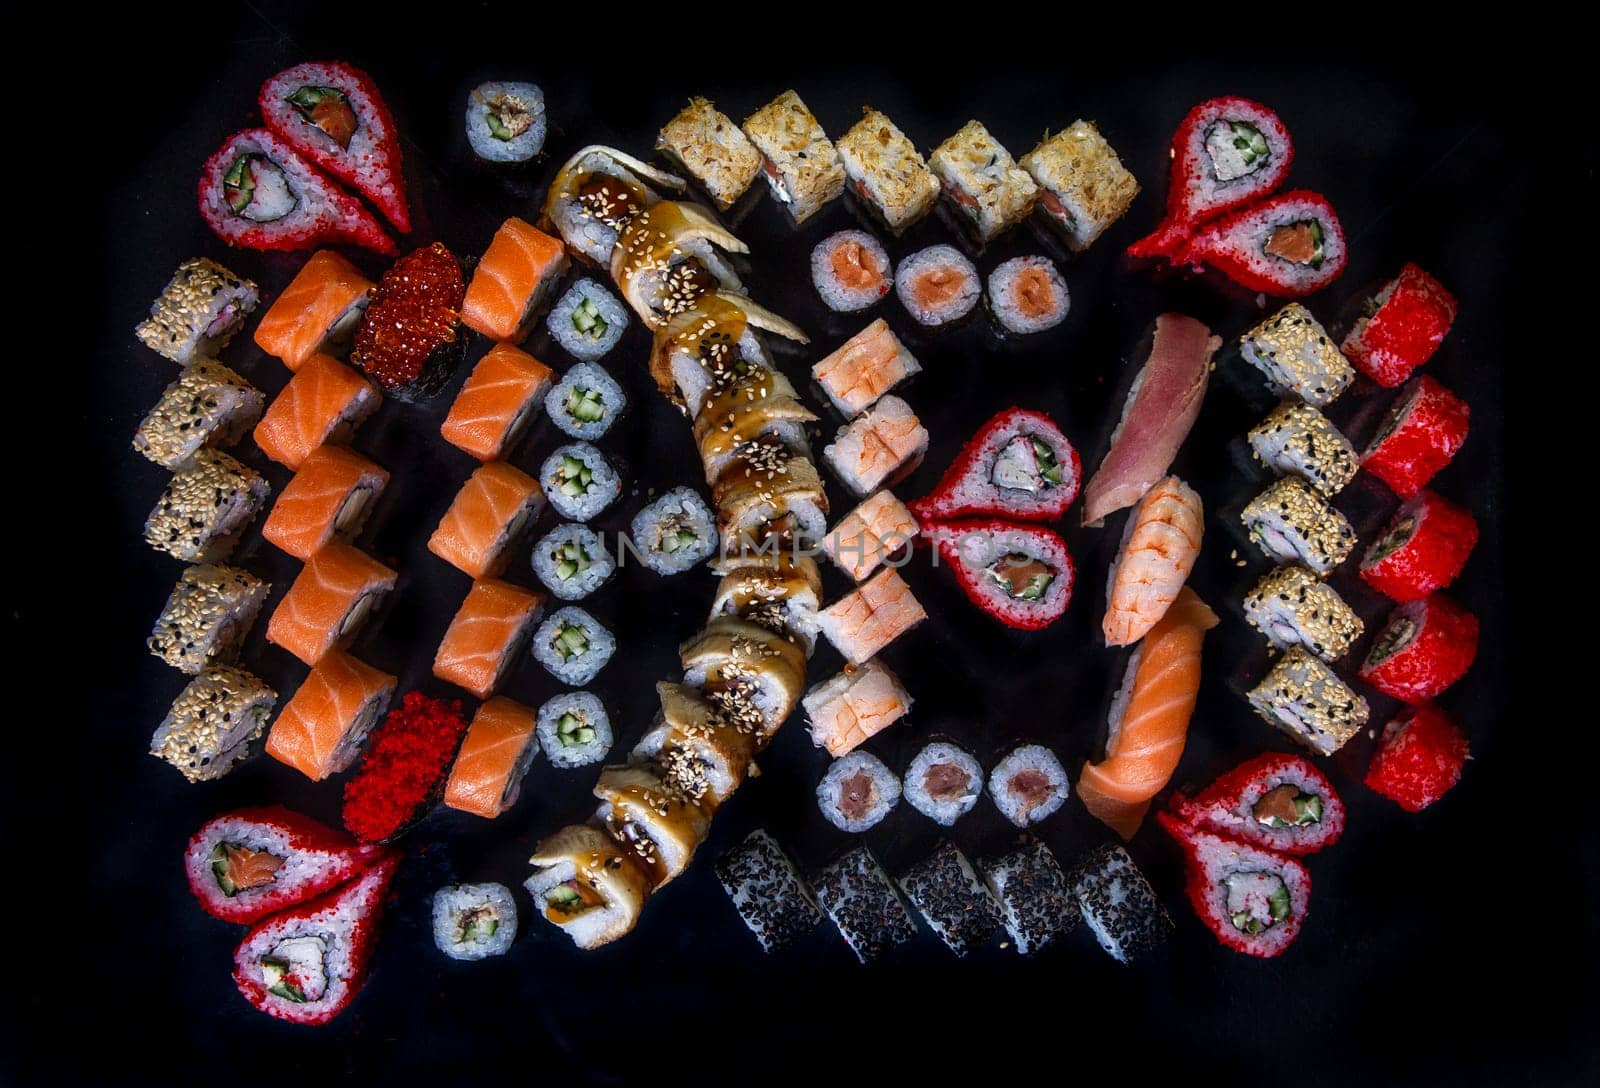 large set sushi and rolls japanese cuisine top view on black background by Pukhovskiy